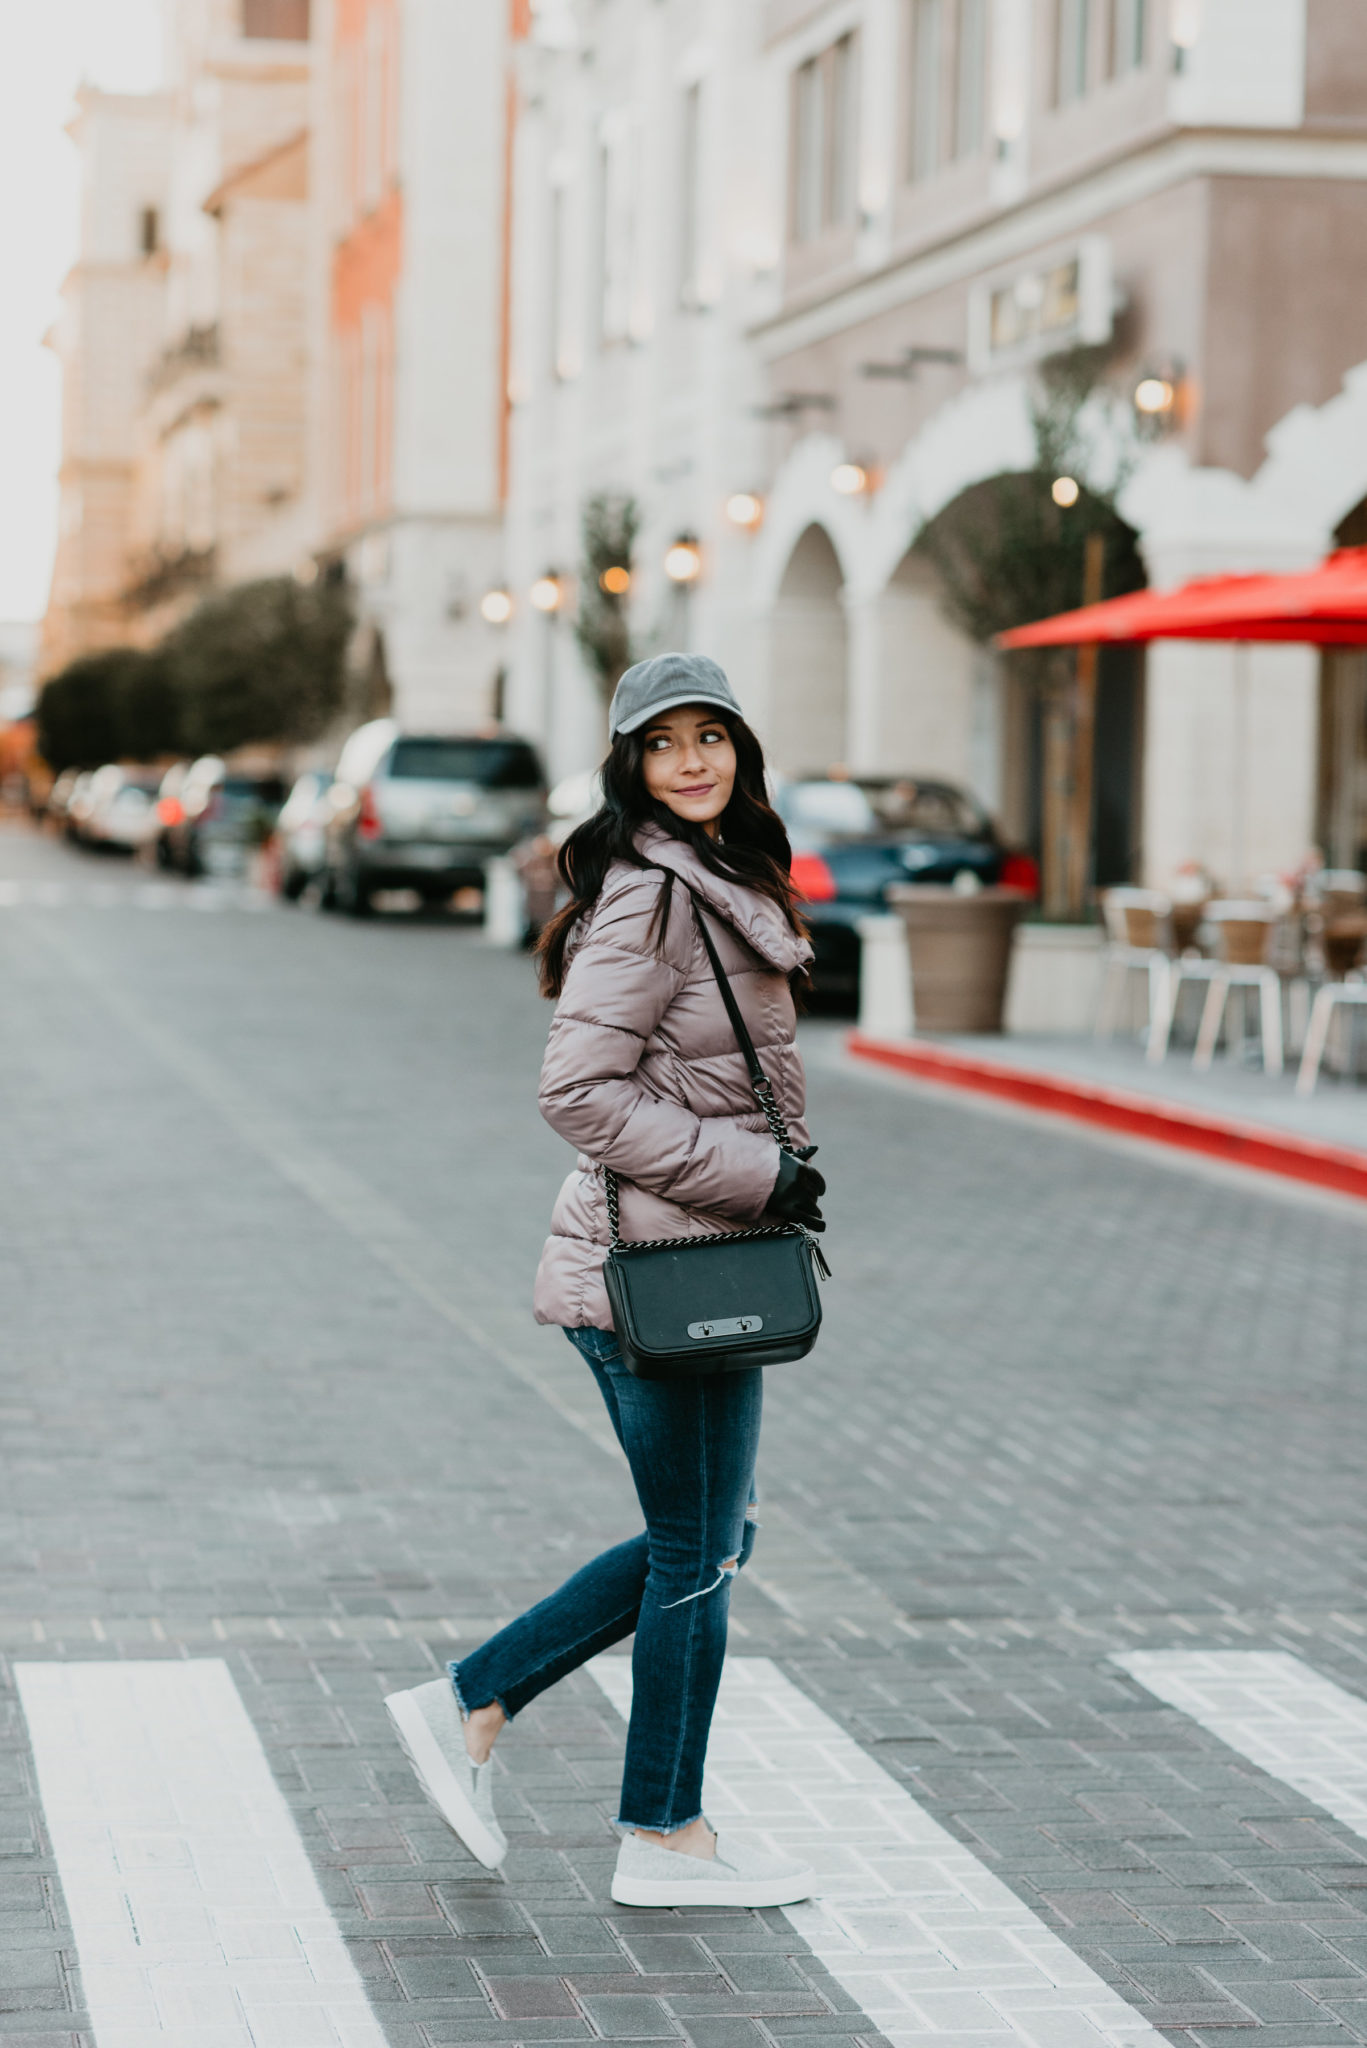 casual winter outfit puffy jacket sneakers baseball cap and ripped jeans - Puffer Jacket Outfit styled by popular Las Vegas fashion blogger, Outfits & Outings